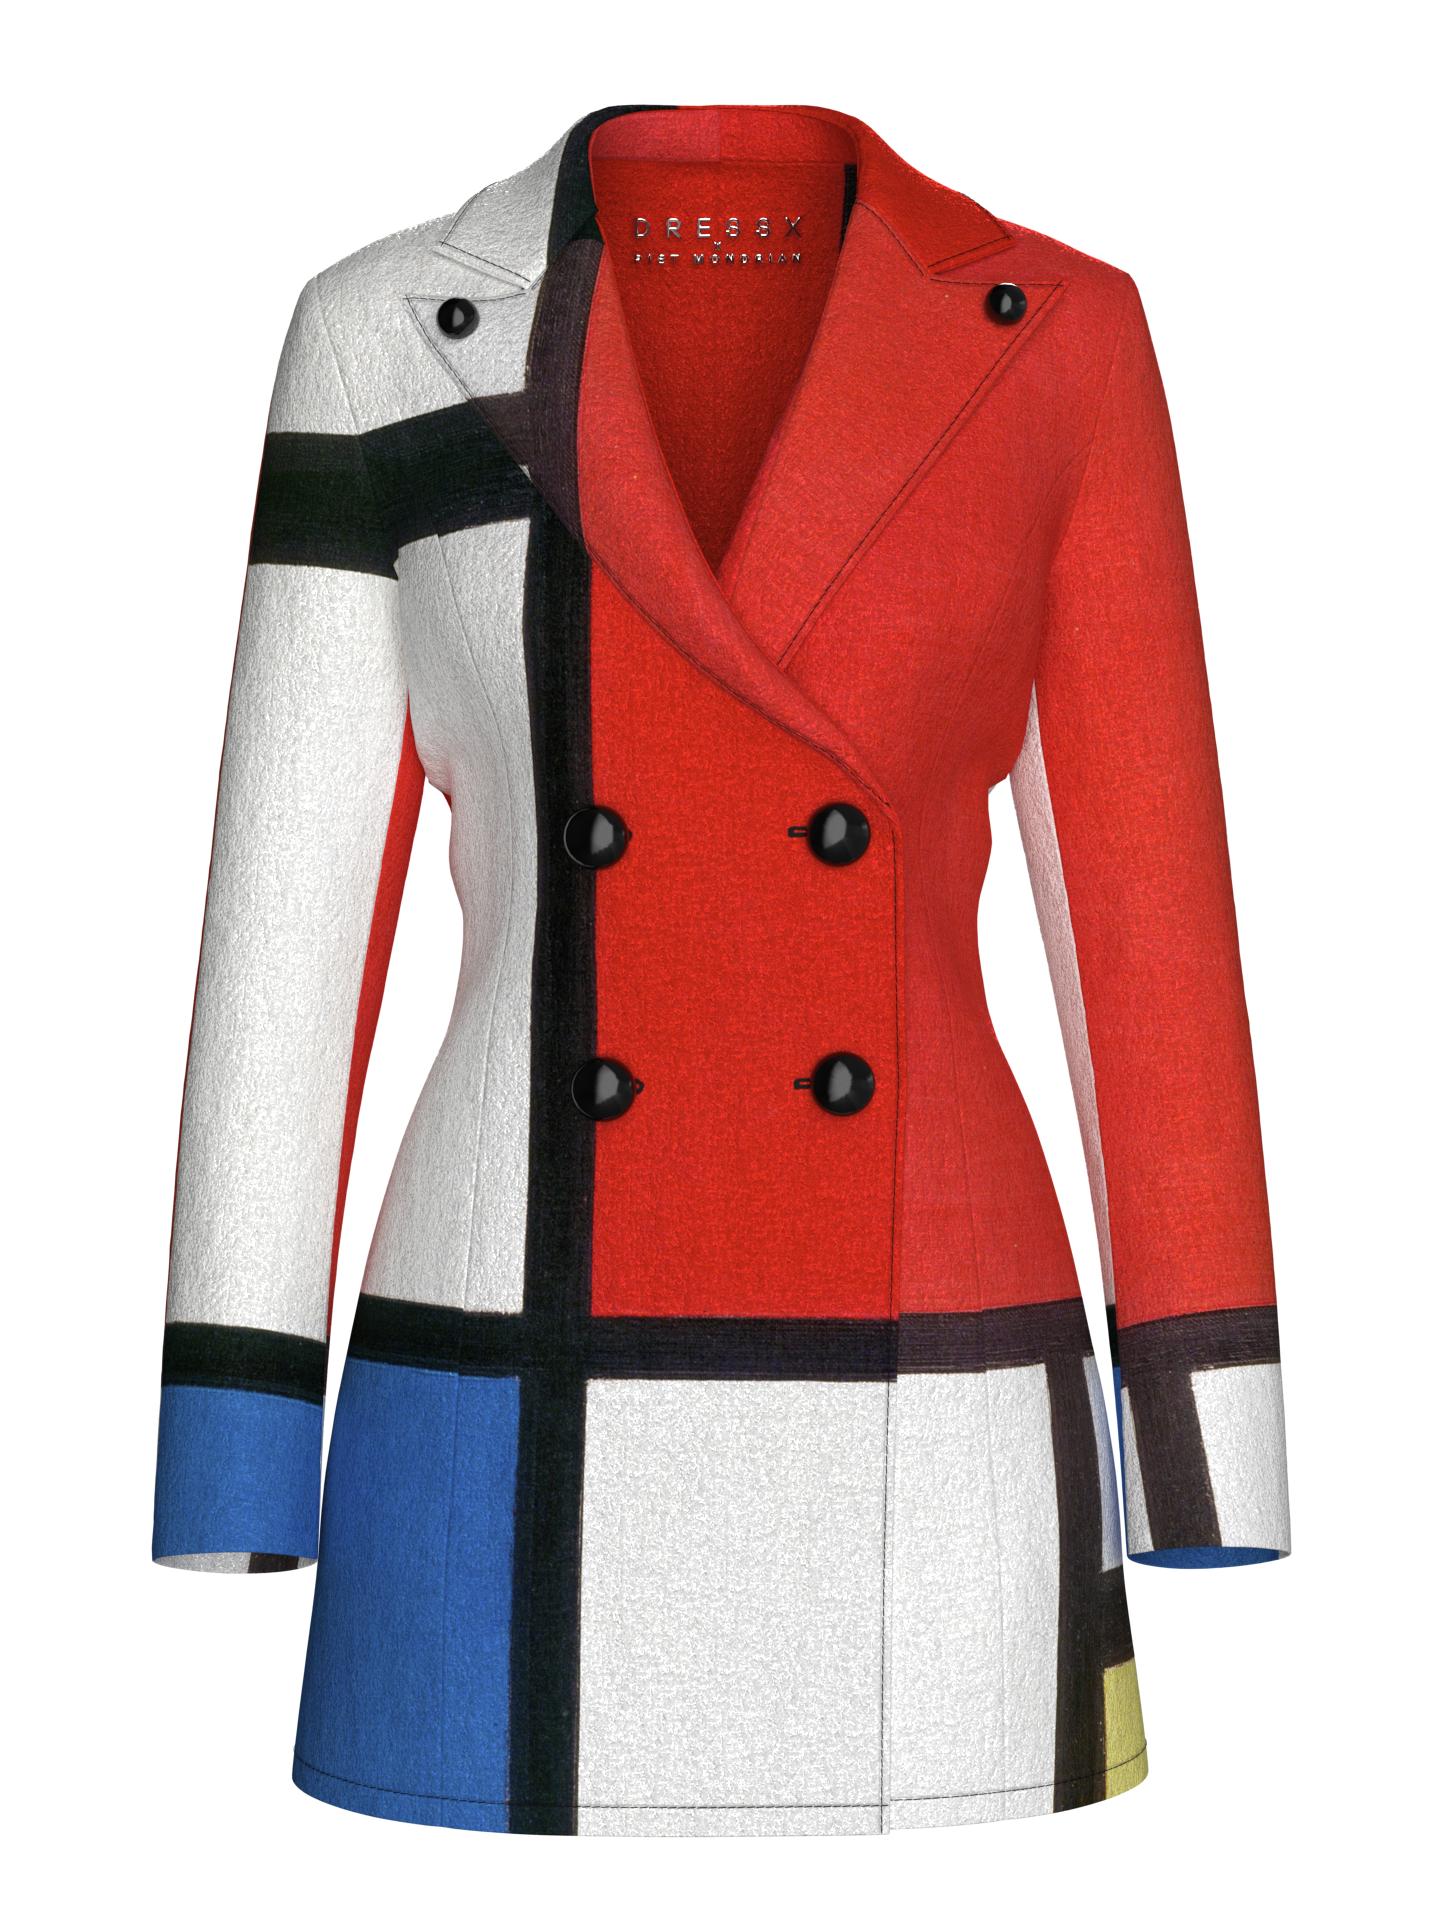 Blazer Dress-Composition with Red,Blue and Yellow by DRESSX PIET MONDRIAN